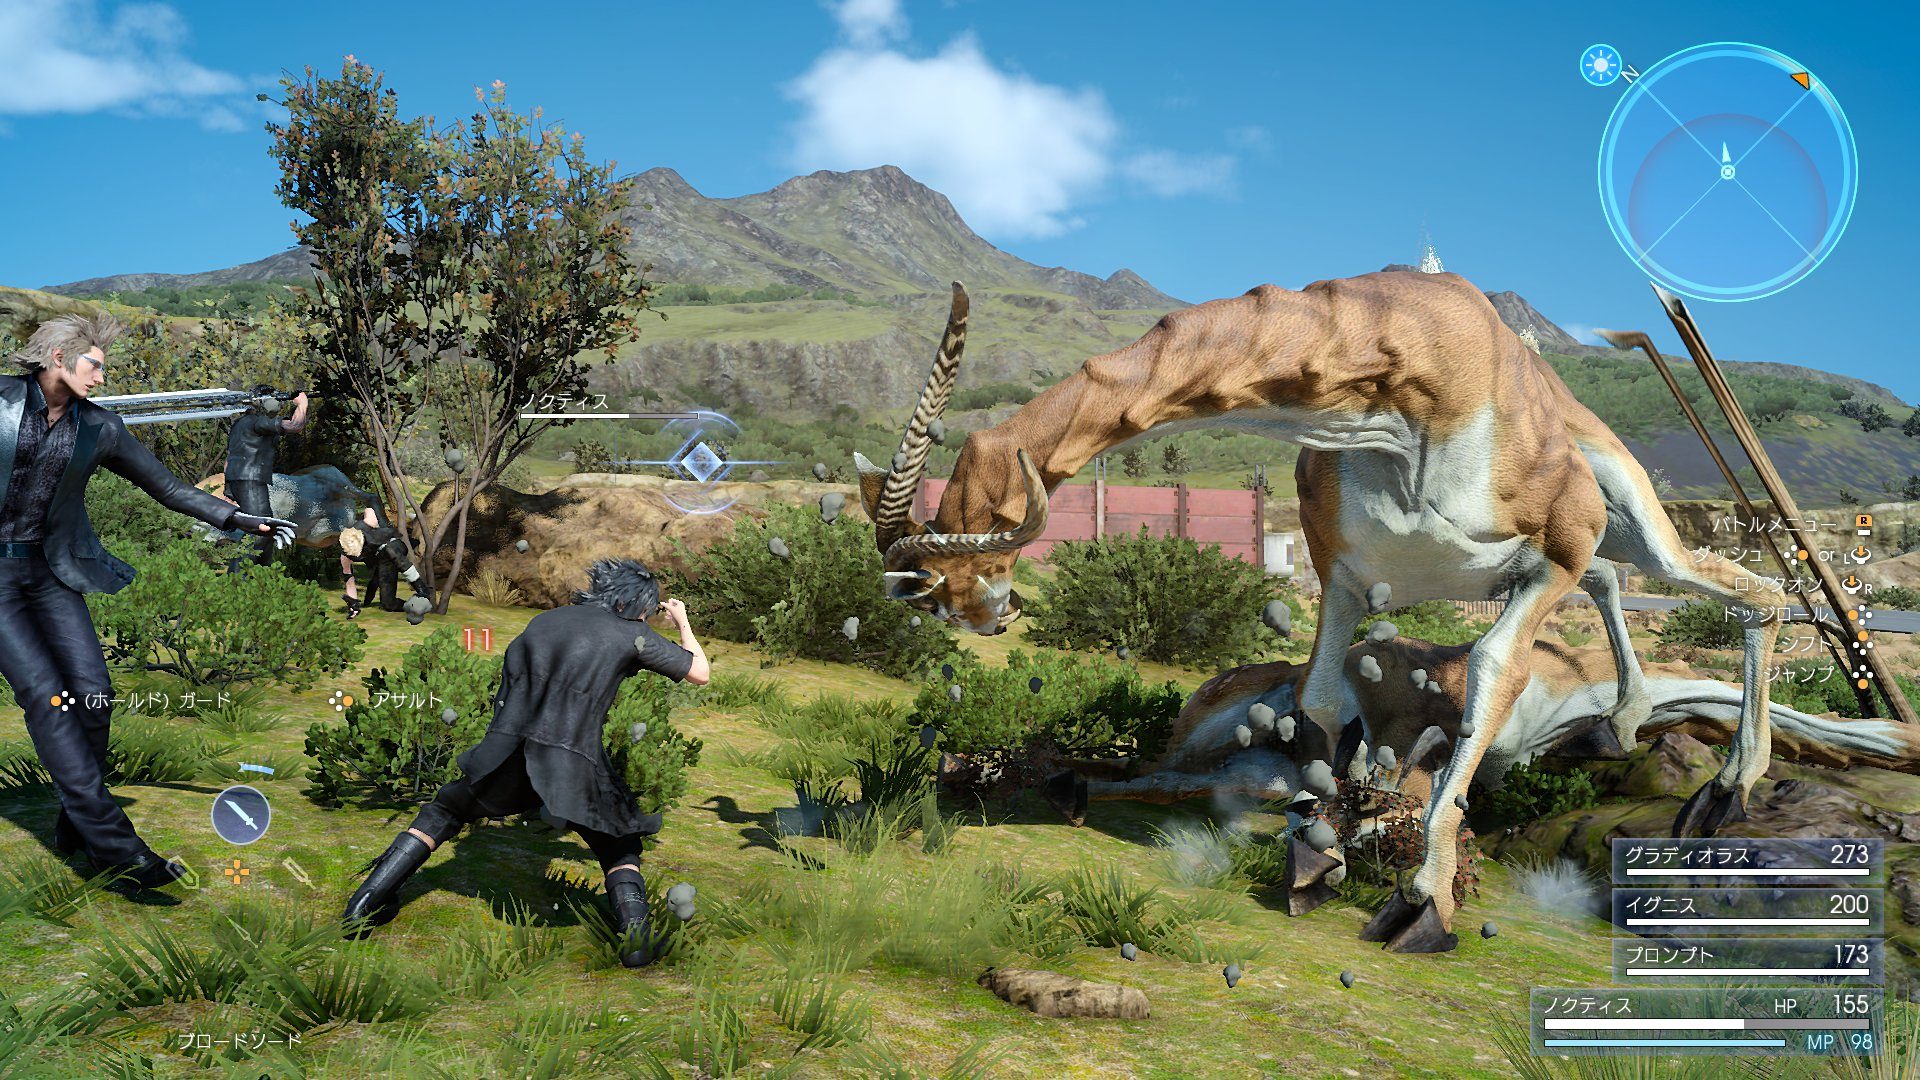 Final Fantasy Xv Update Patch 1 09 Is Out Now To Download Just Push Start